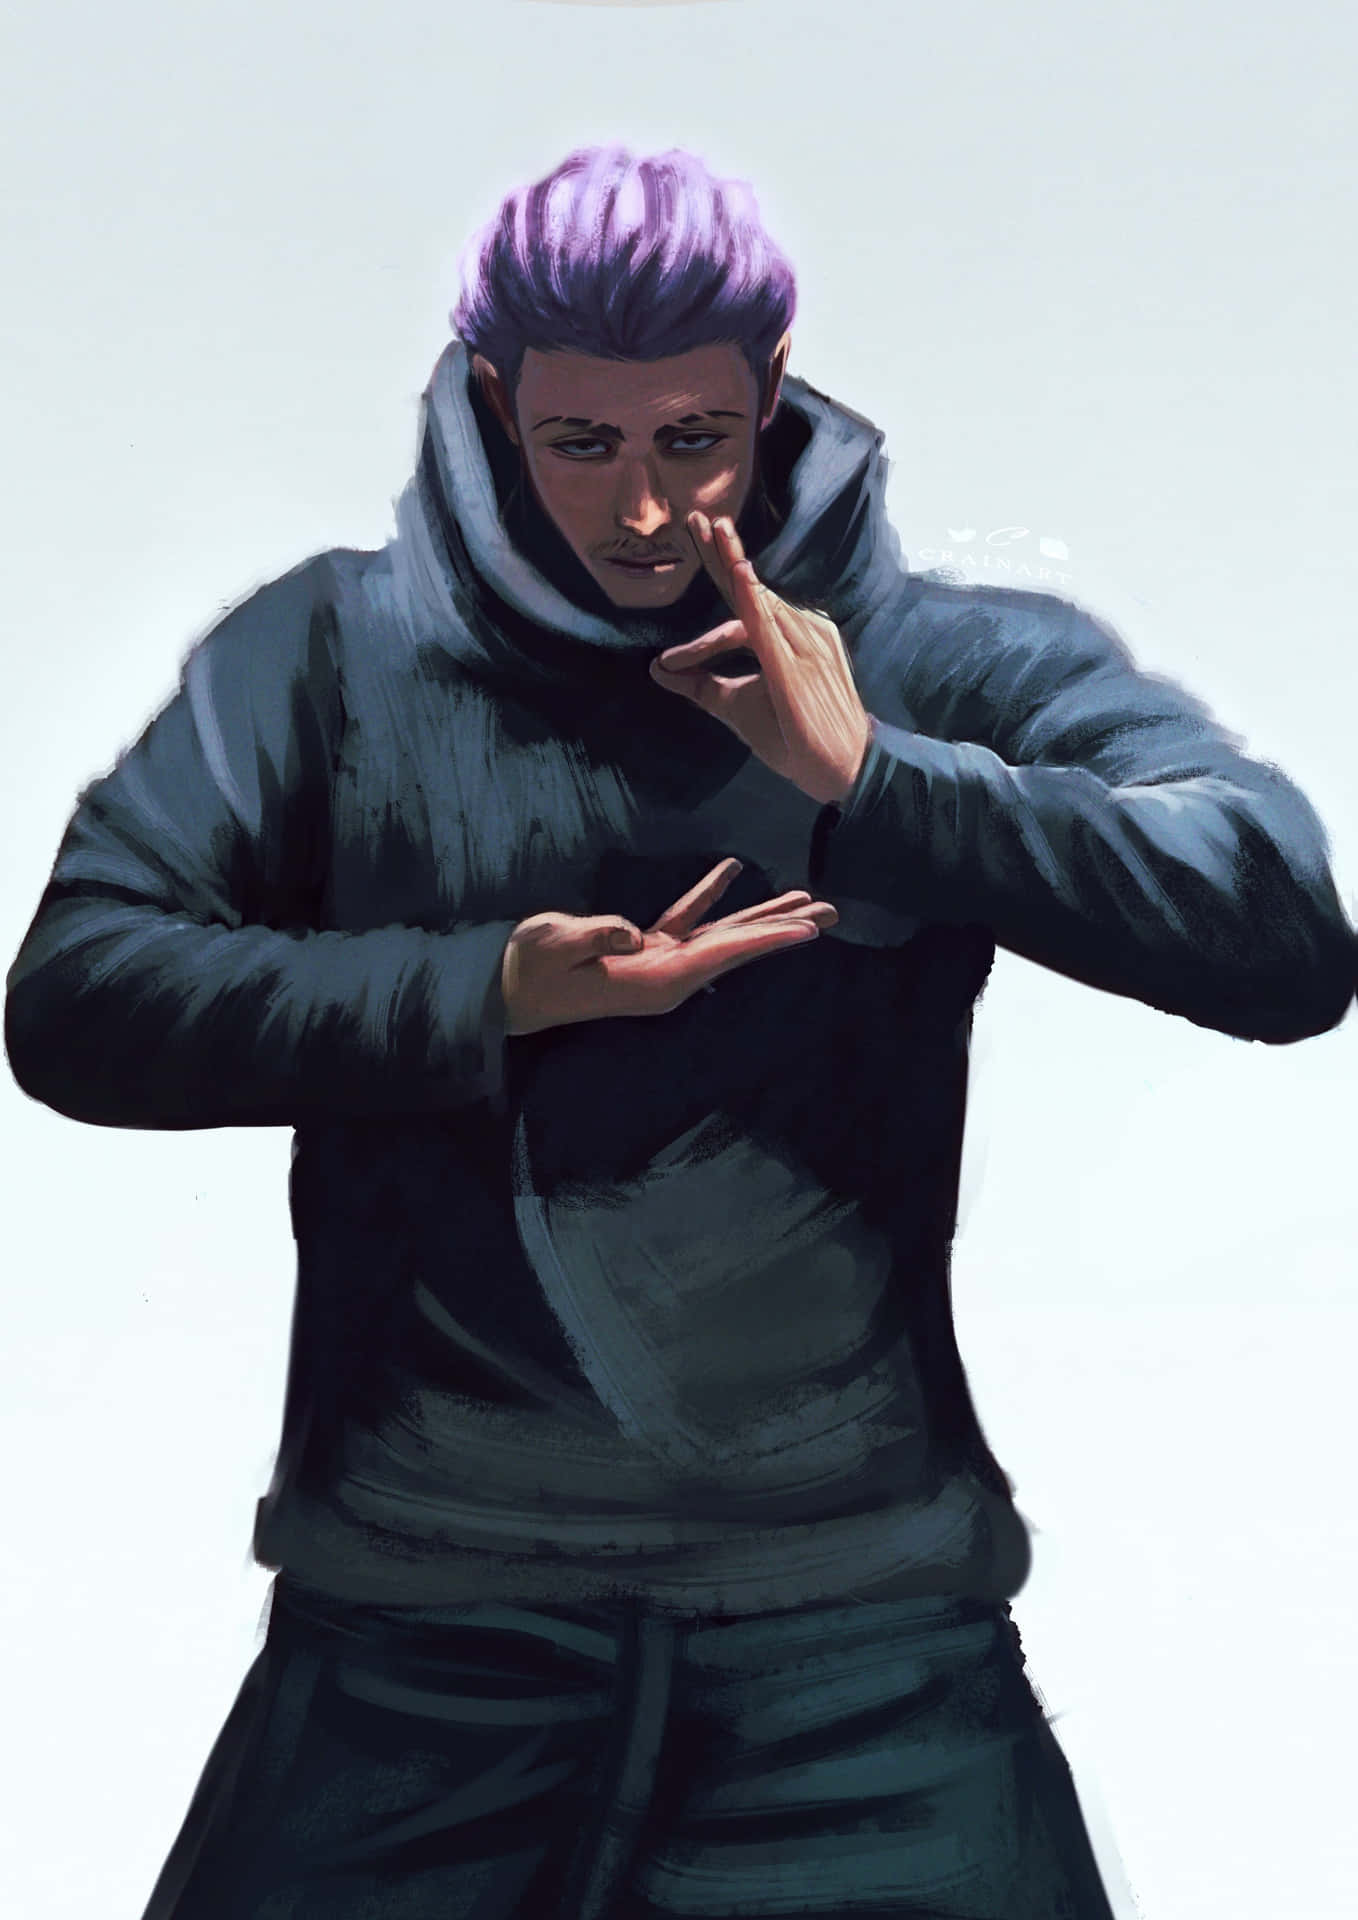 Mysterious Purple Haired Man Gesture Wallpaper